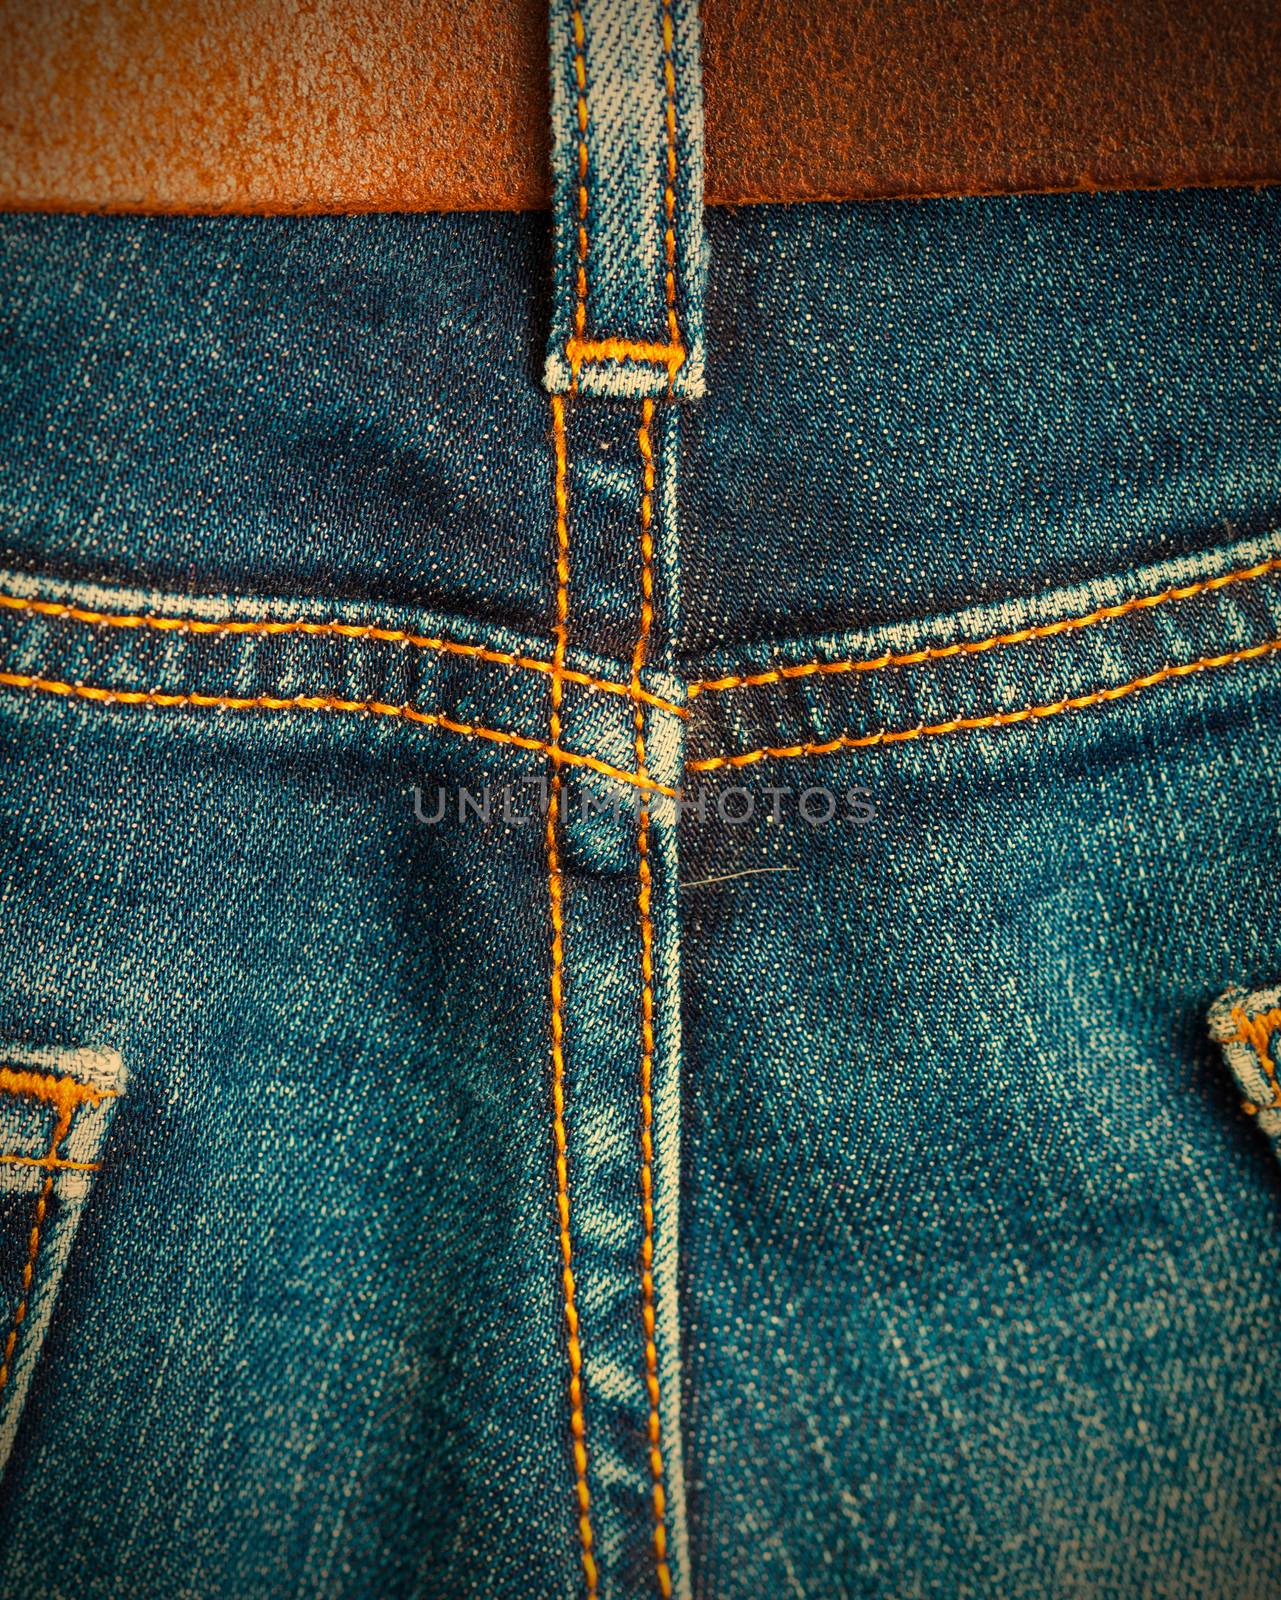 ol blue denim with seams and leather belt  by Astroid